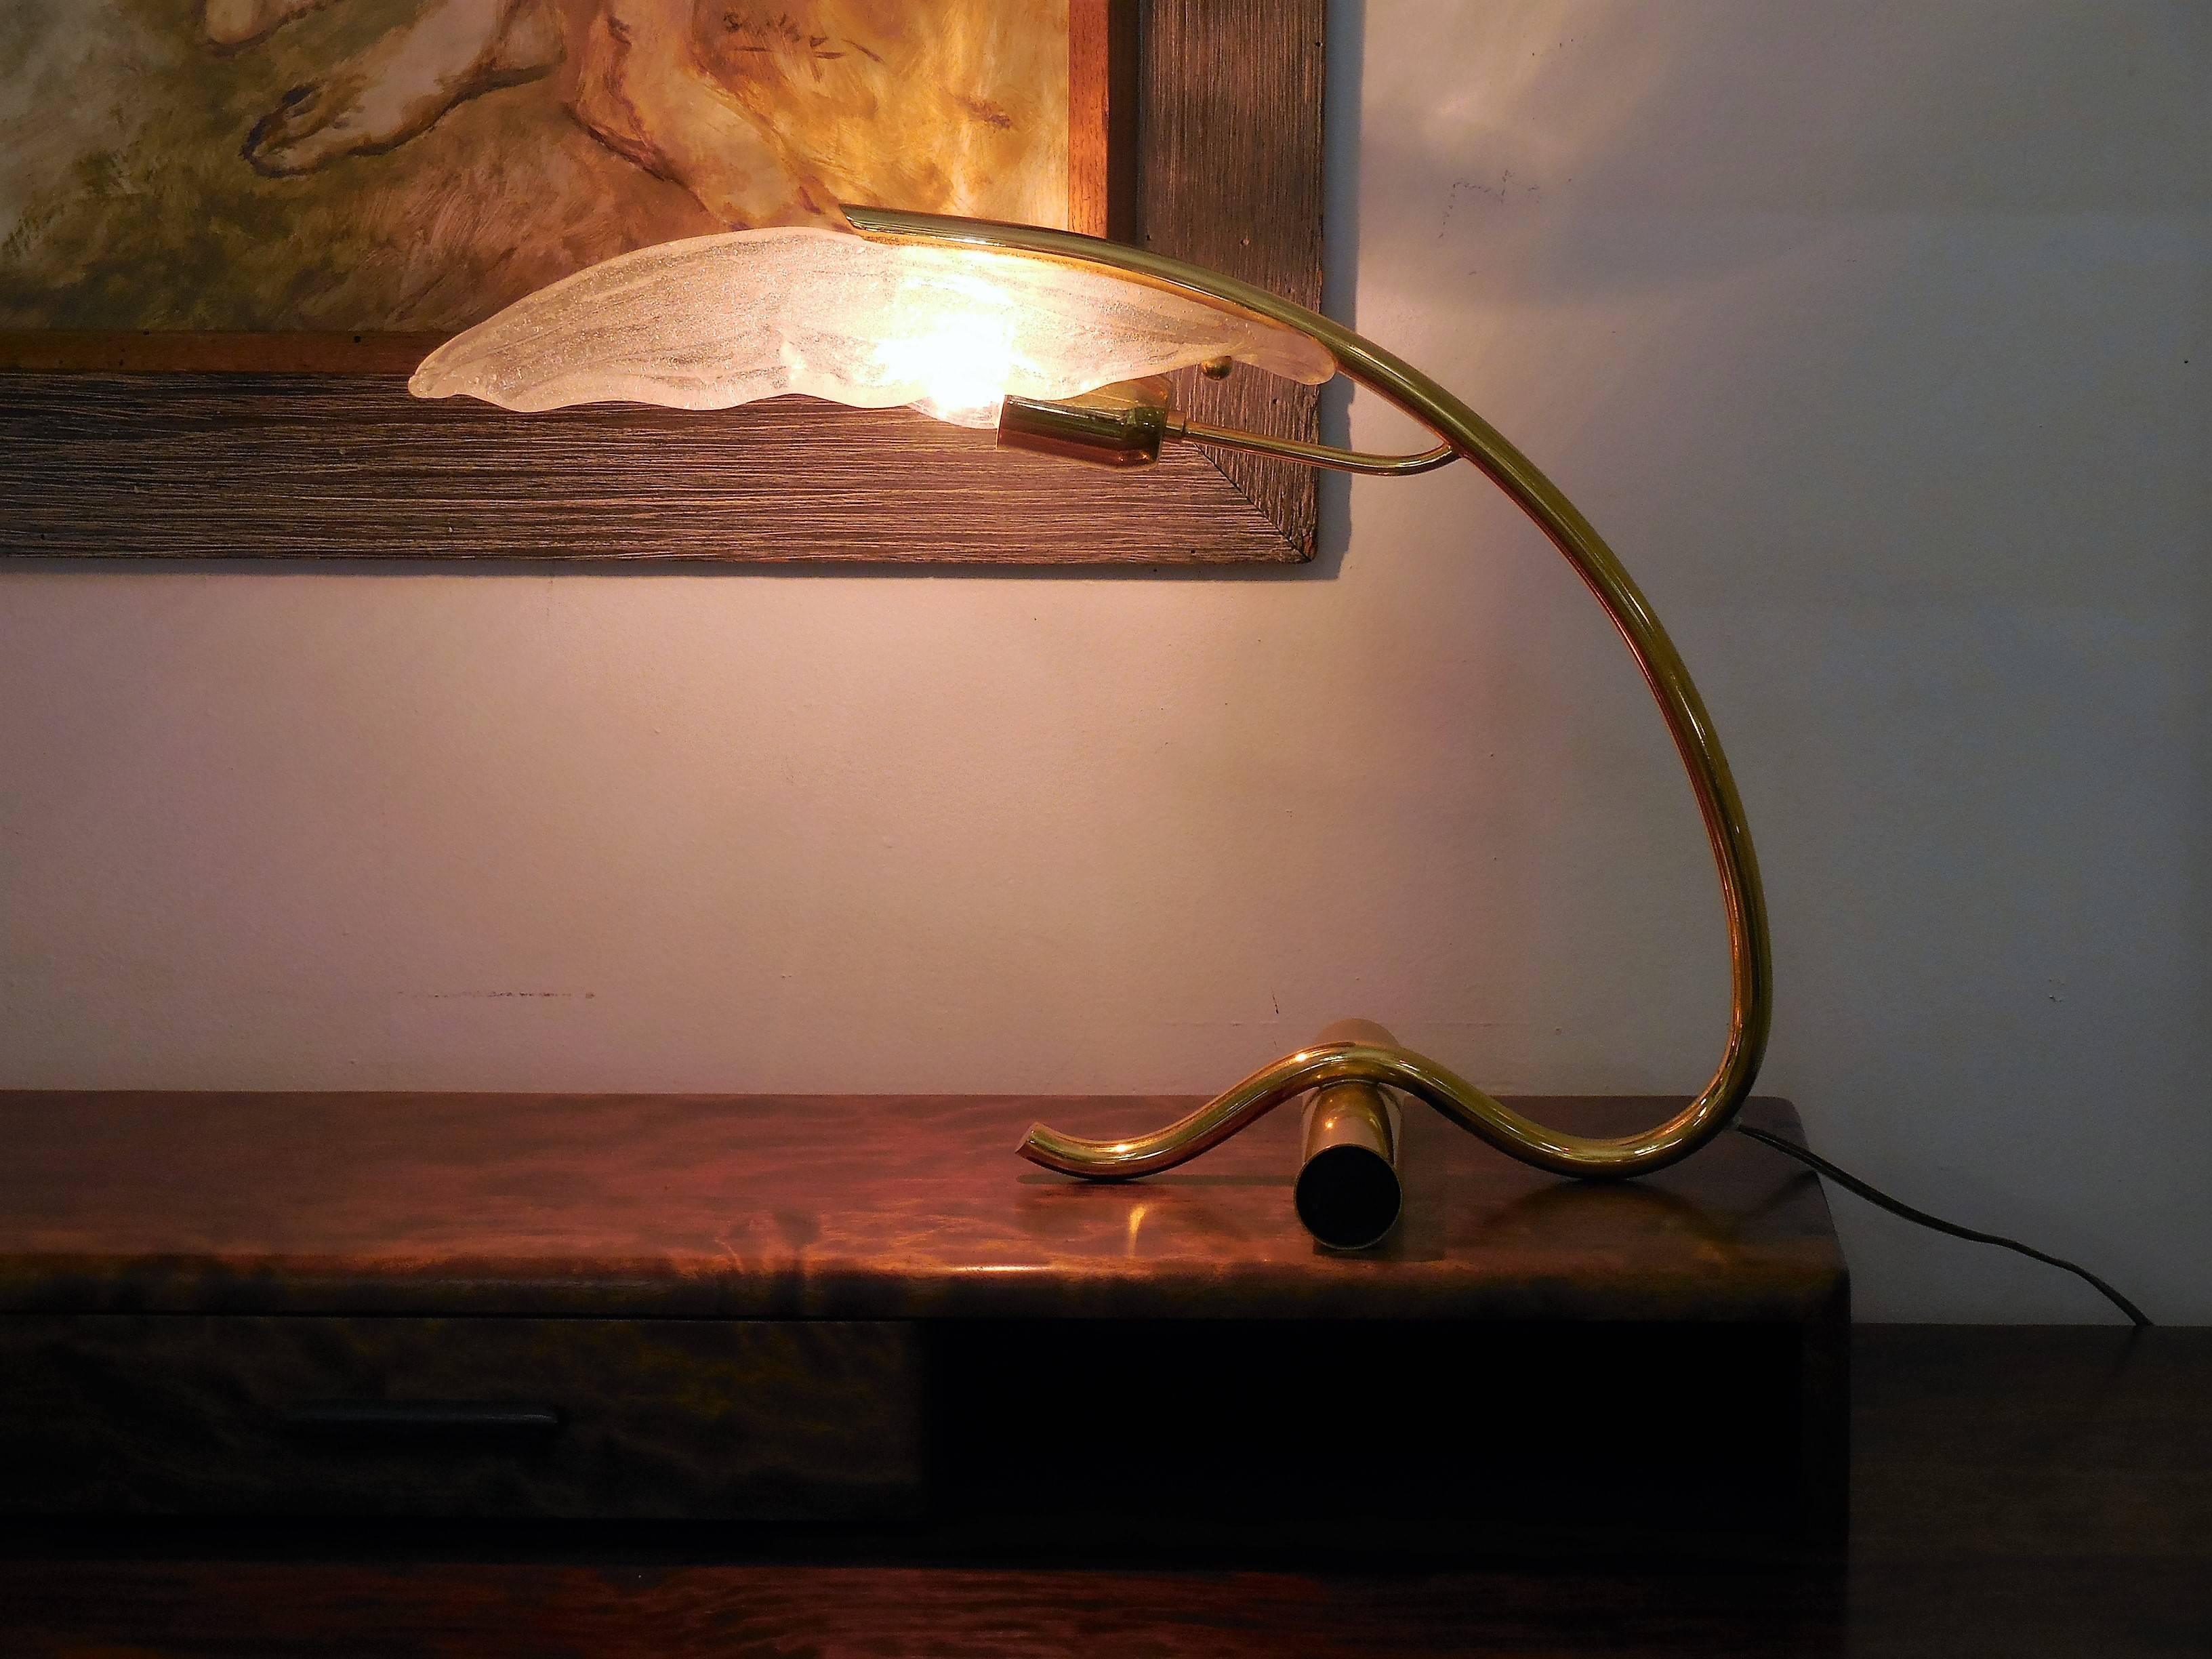 A most unusual and beautiful desk lamp. Thick Murano glass diffuser attached to a graceful base. Retains makers tag. Looks incredible both on and off.